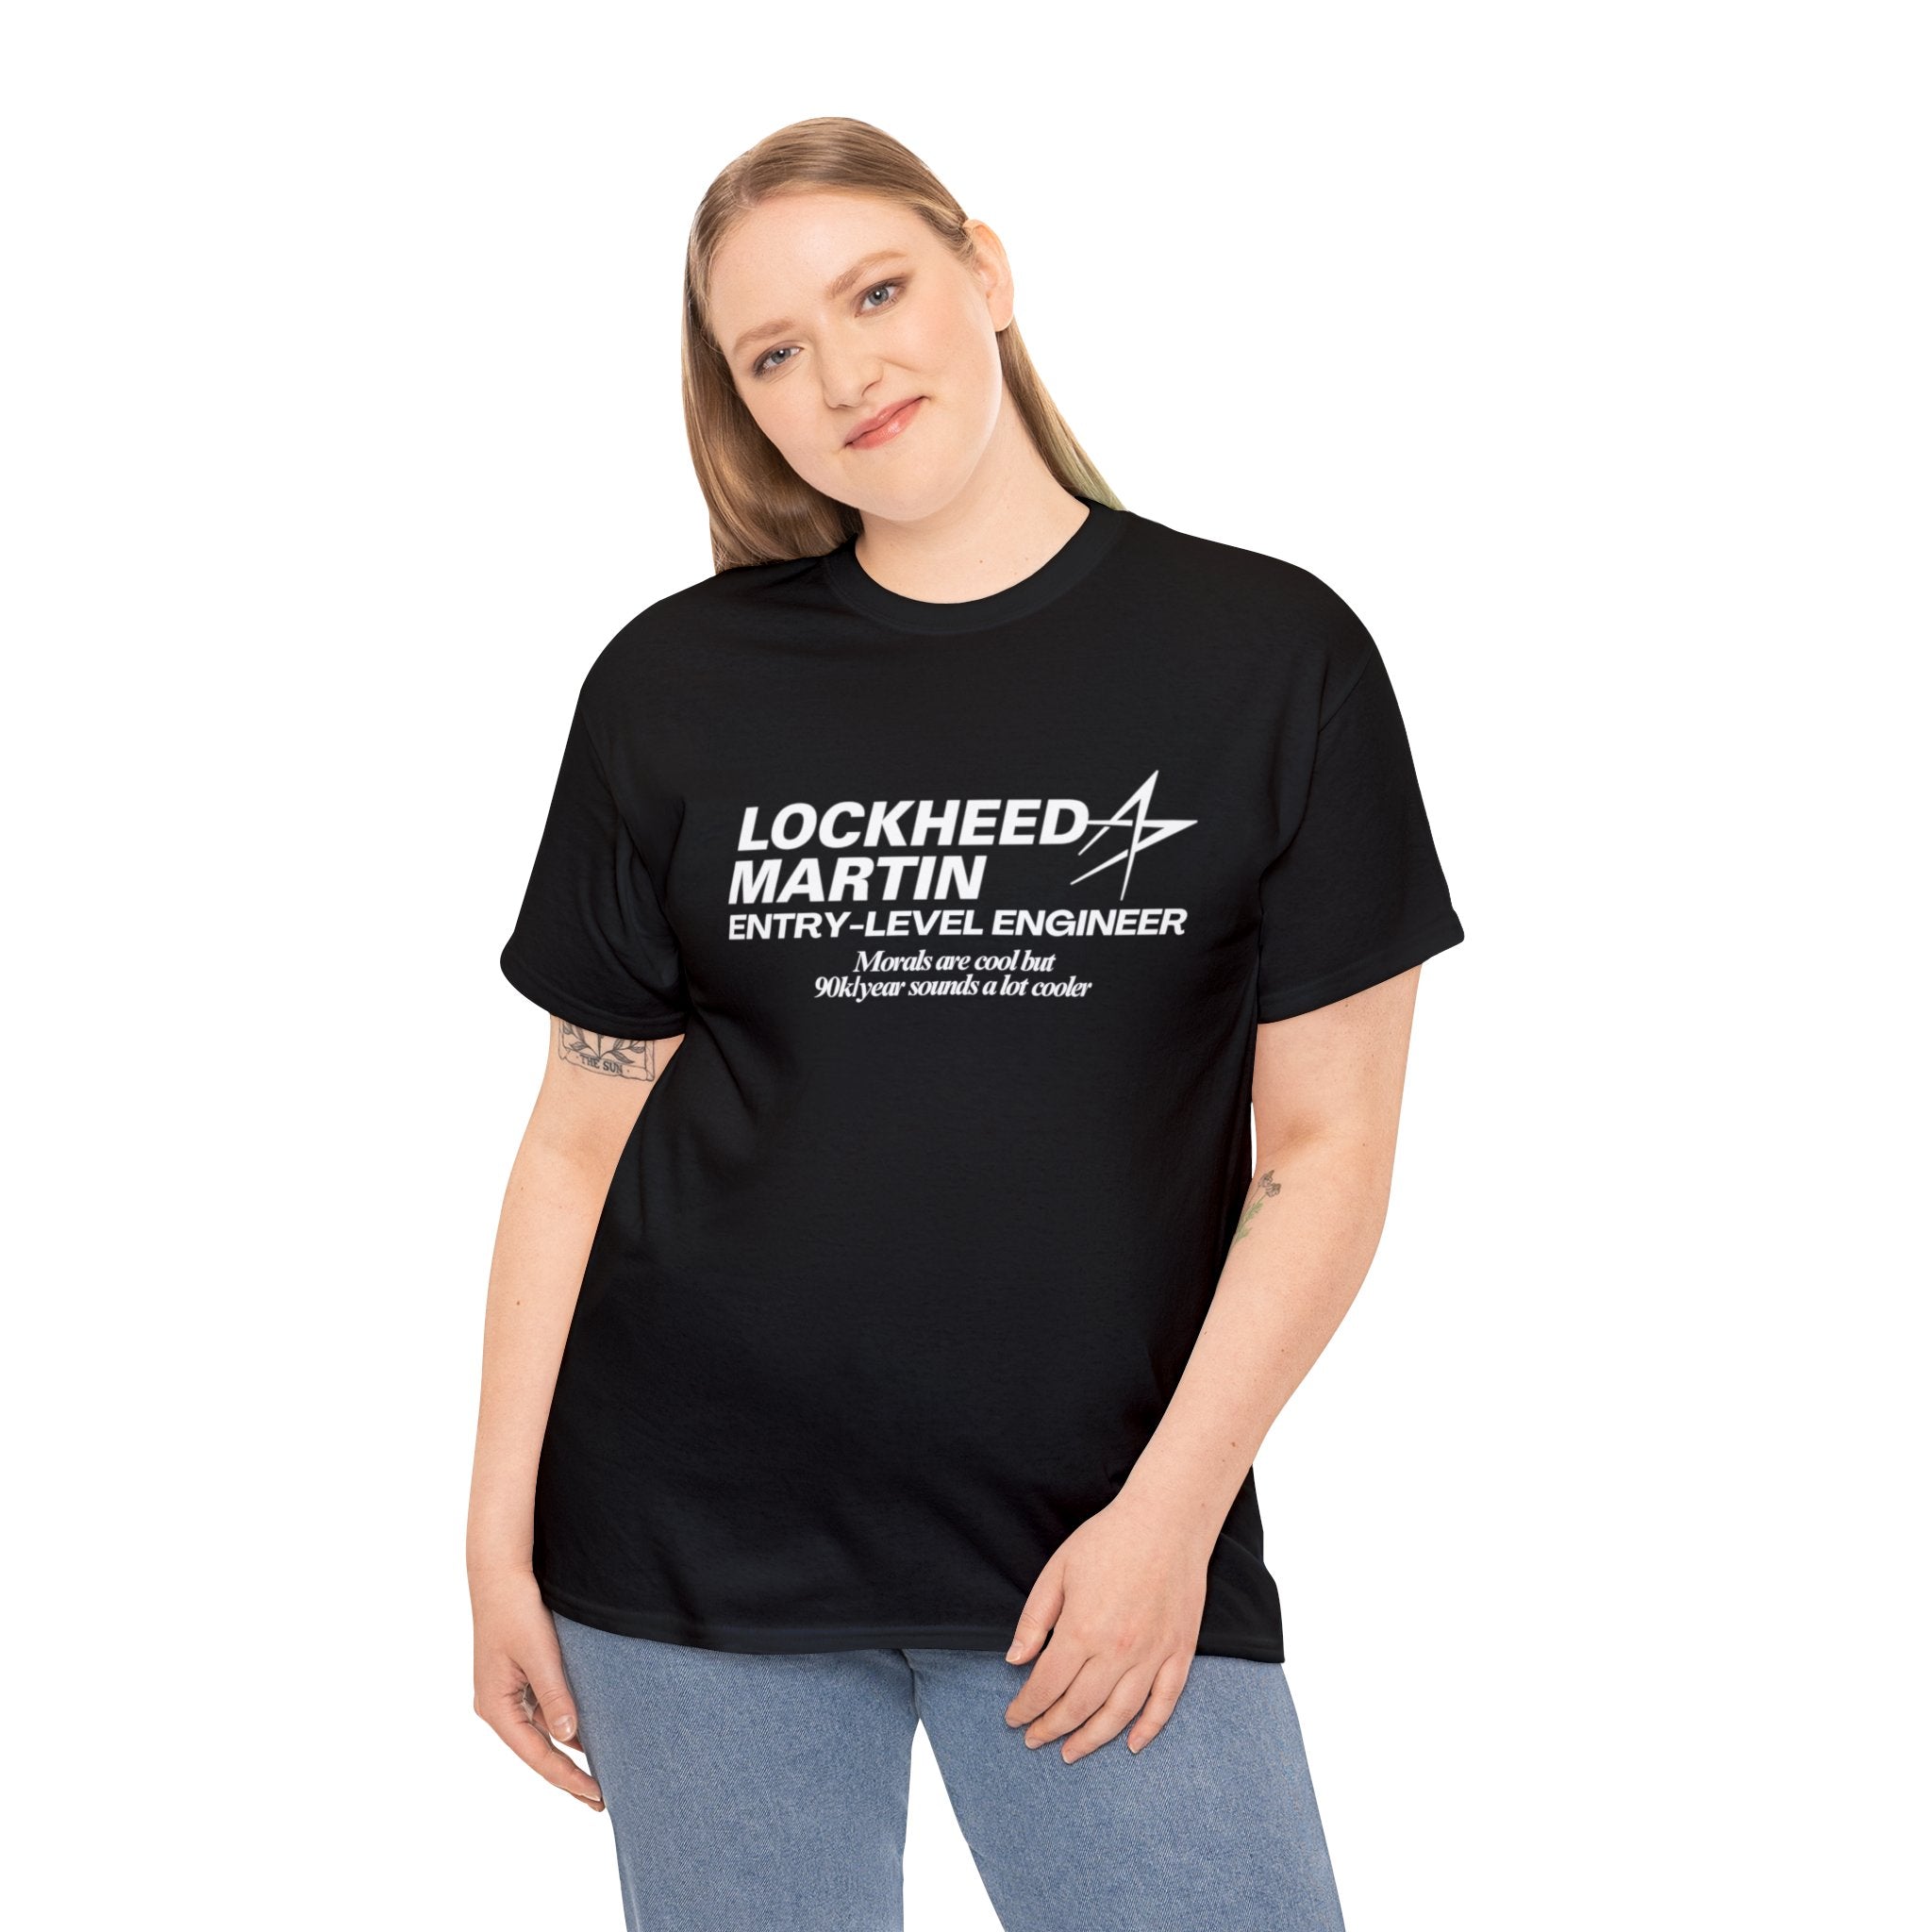 Lockheed Martin Entry Level Engineer (Morals are cool but 90k/year sounds a lot cooler) - Unisex Heavy Cotton Tee